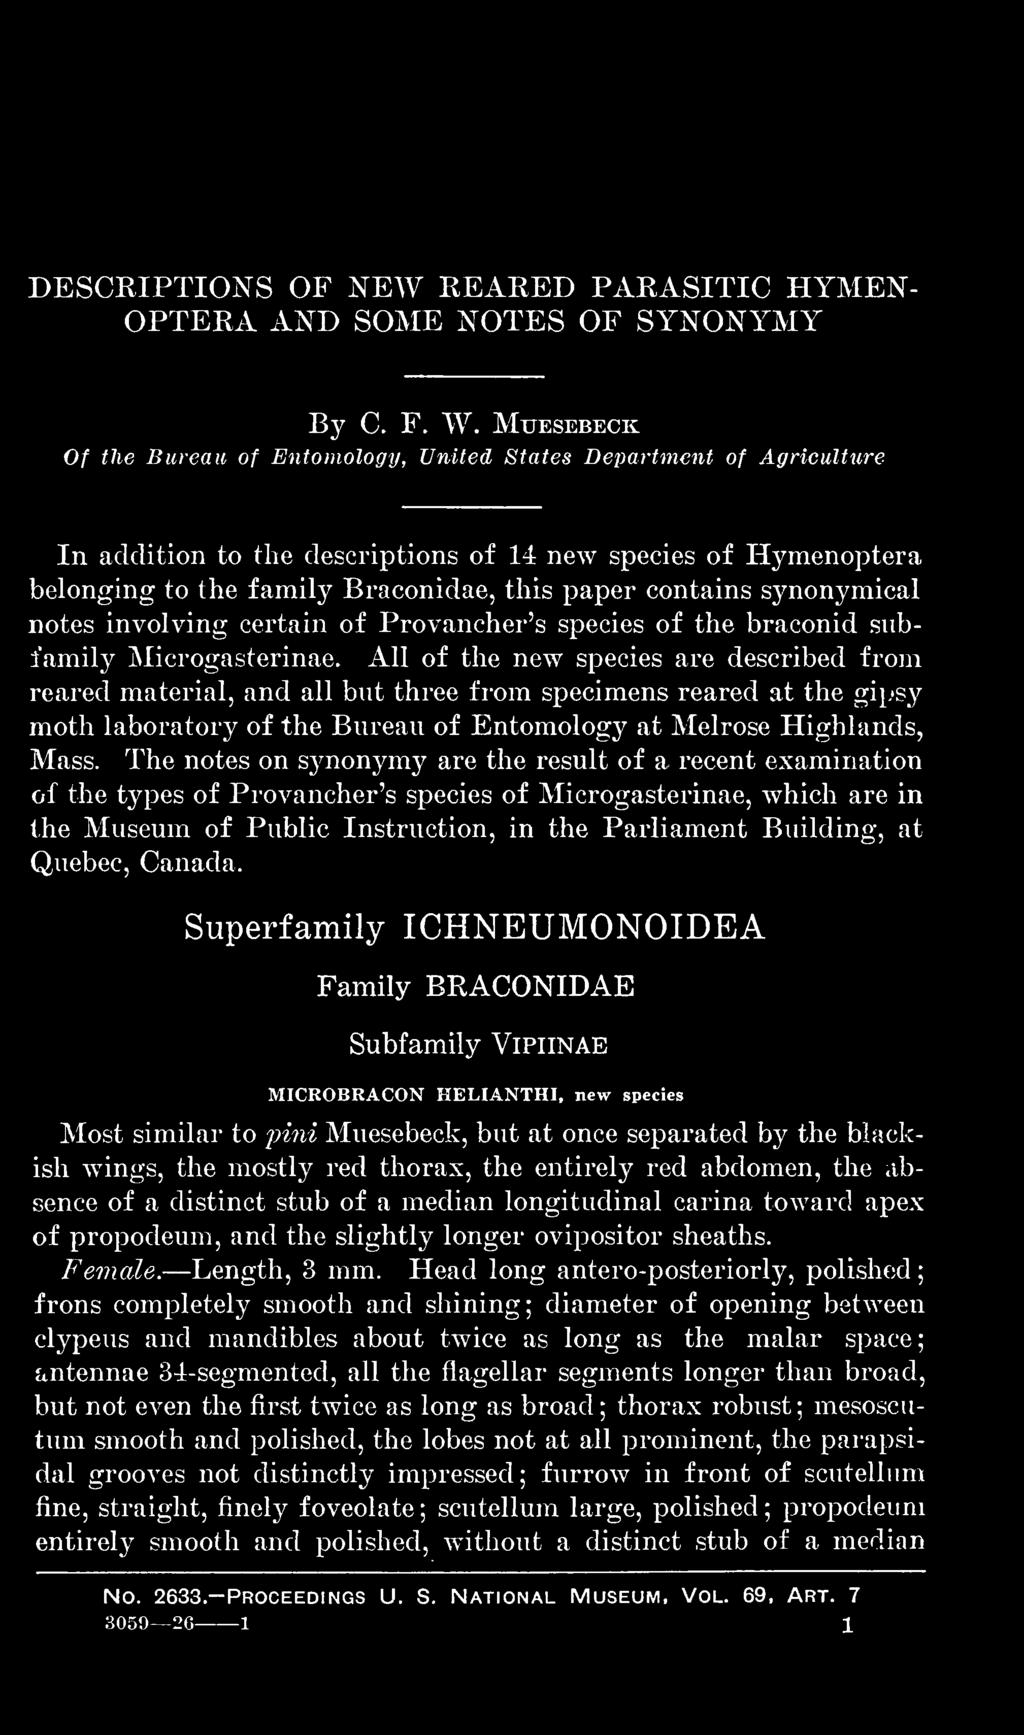 synonymical notes involving certain of Provancher's species of the braconid subfamily INIicrogasterinae.